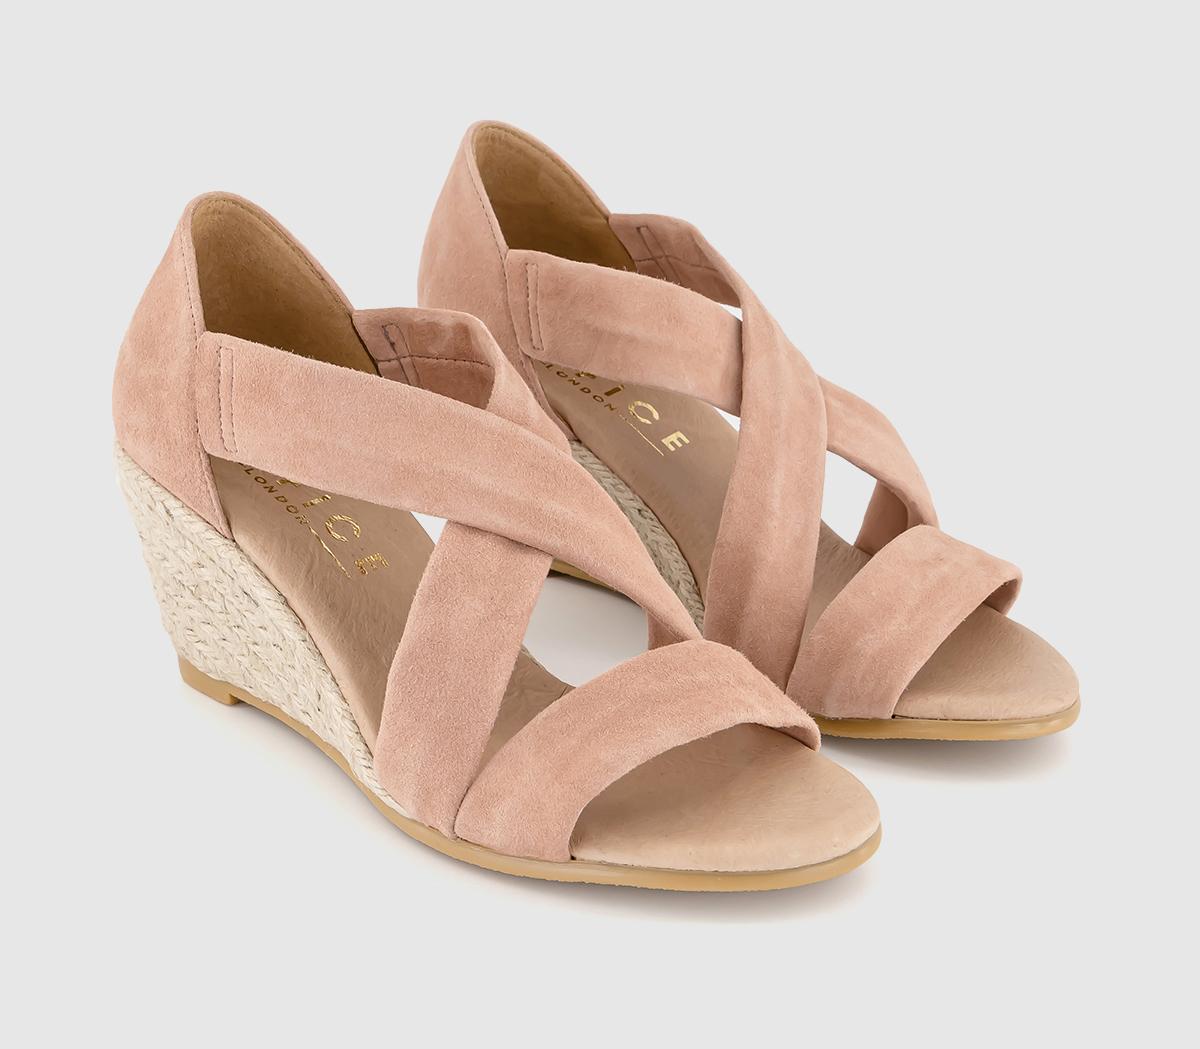 OFFICE Womens Women’s Pink Suede Nude Maiden Cross Strap Wedge Sandals, Size: 3